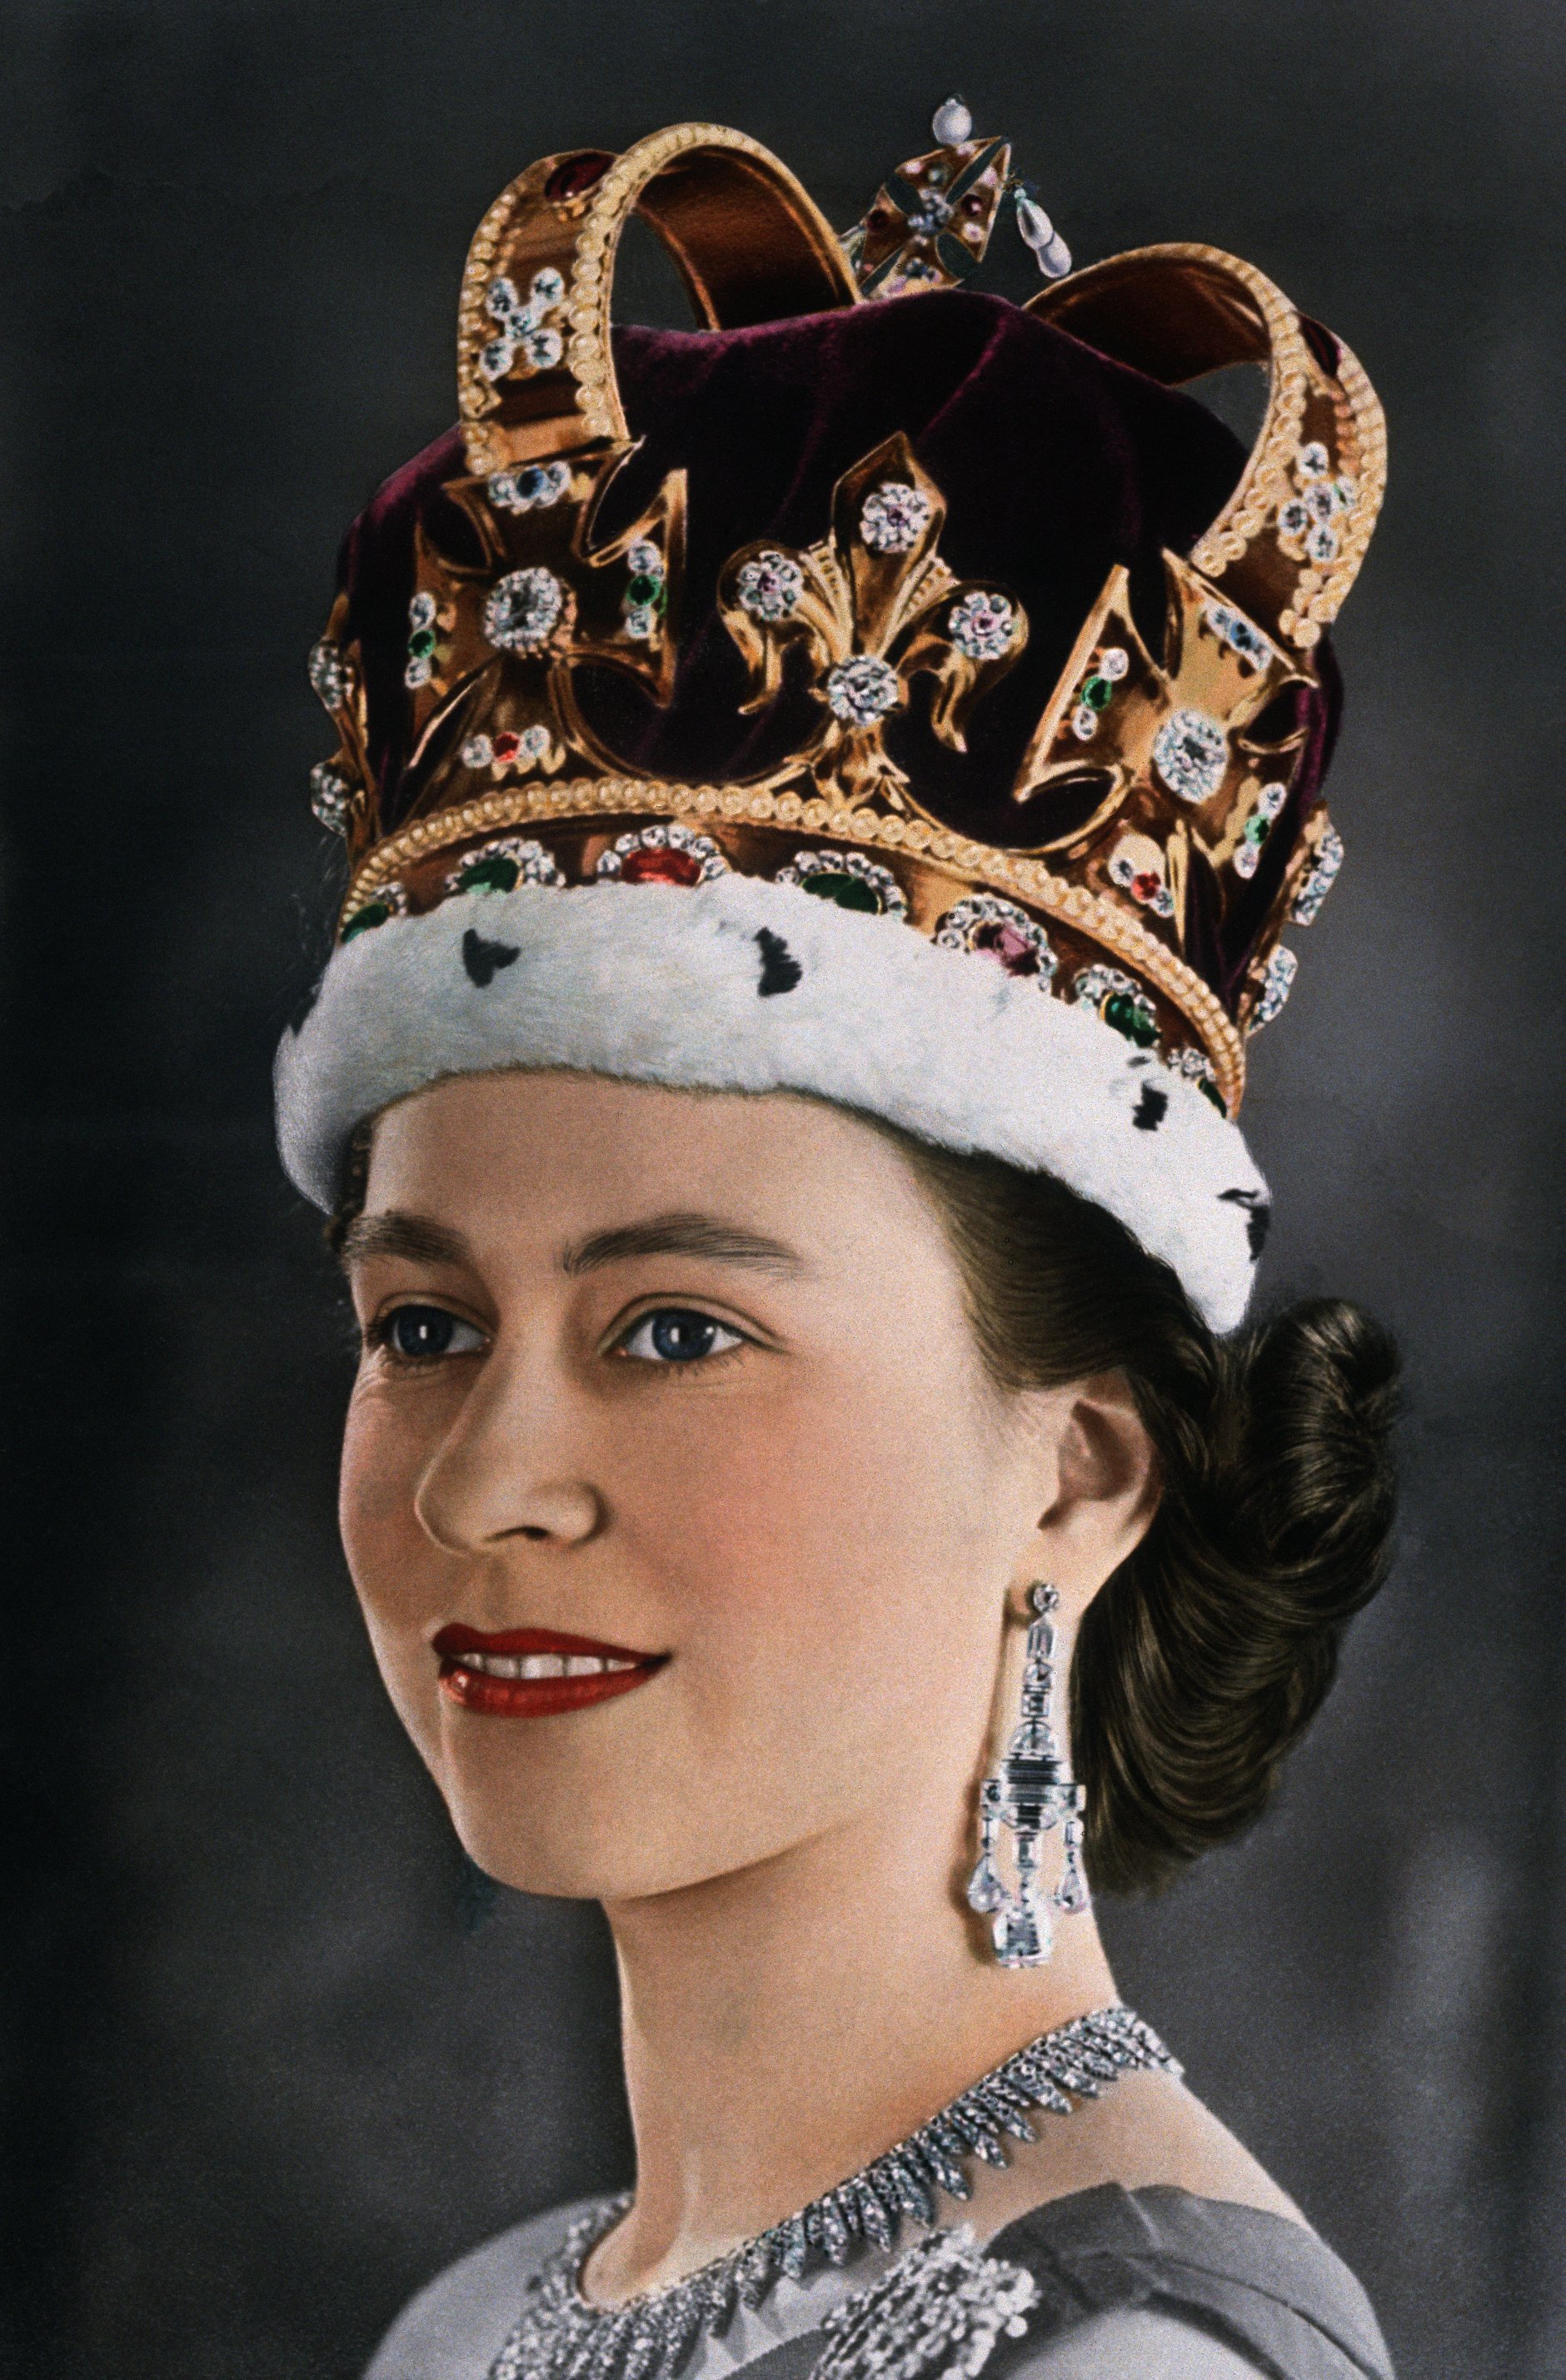 A portrait of young Elizabeth II (1926- ) of Great Britain and Northern Ireland, wearing the crown of the kings and queens of England for her coronation in June of 1953 | Source: Getty Images